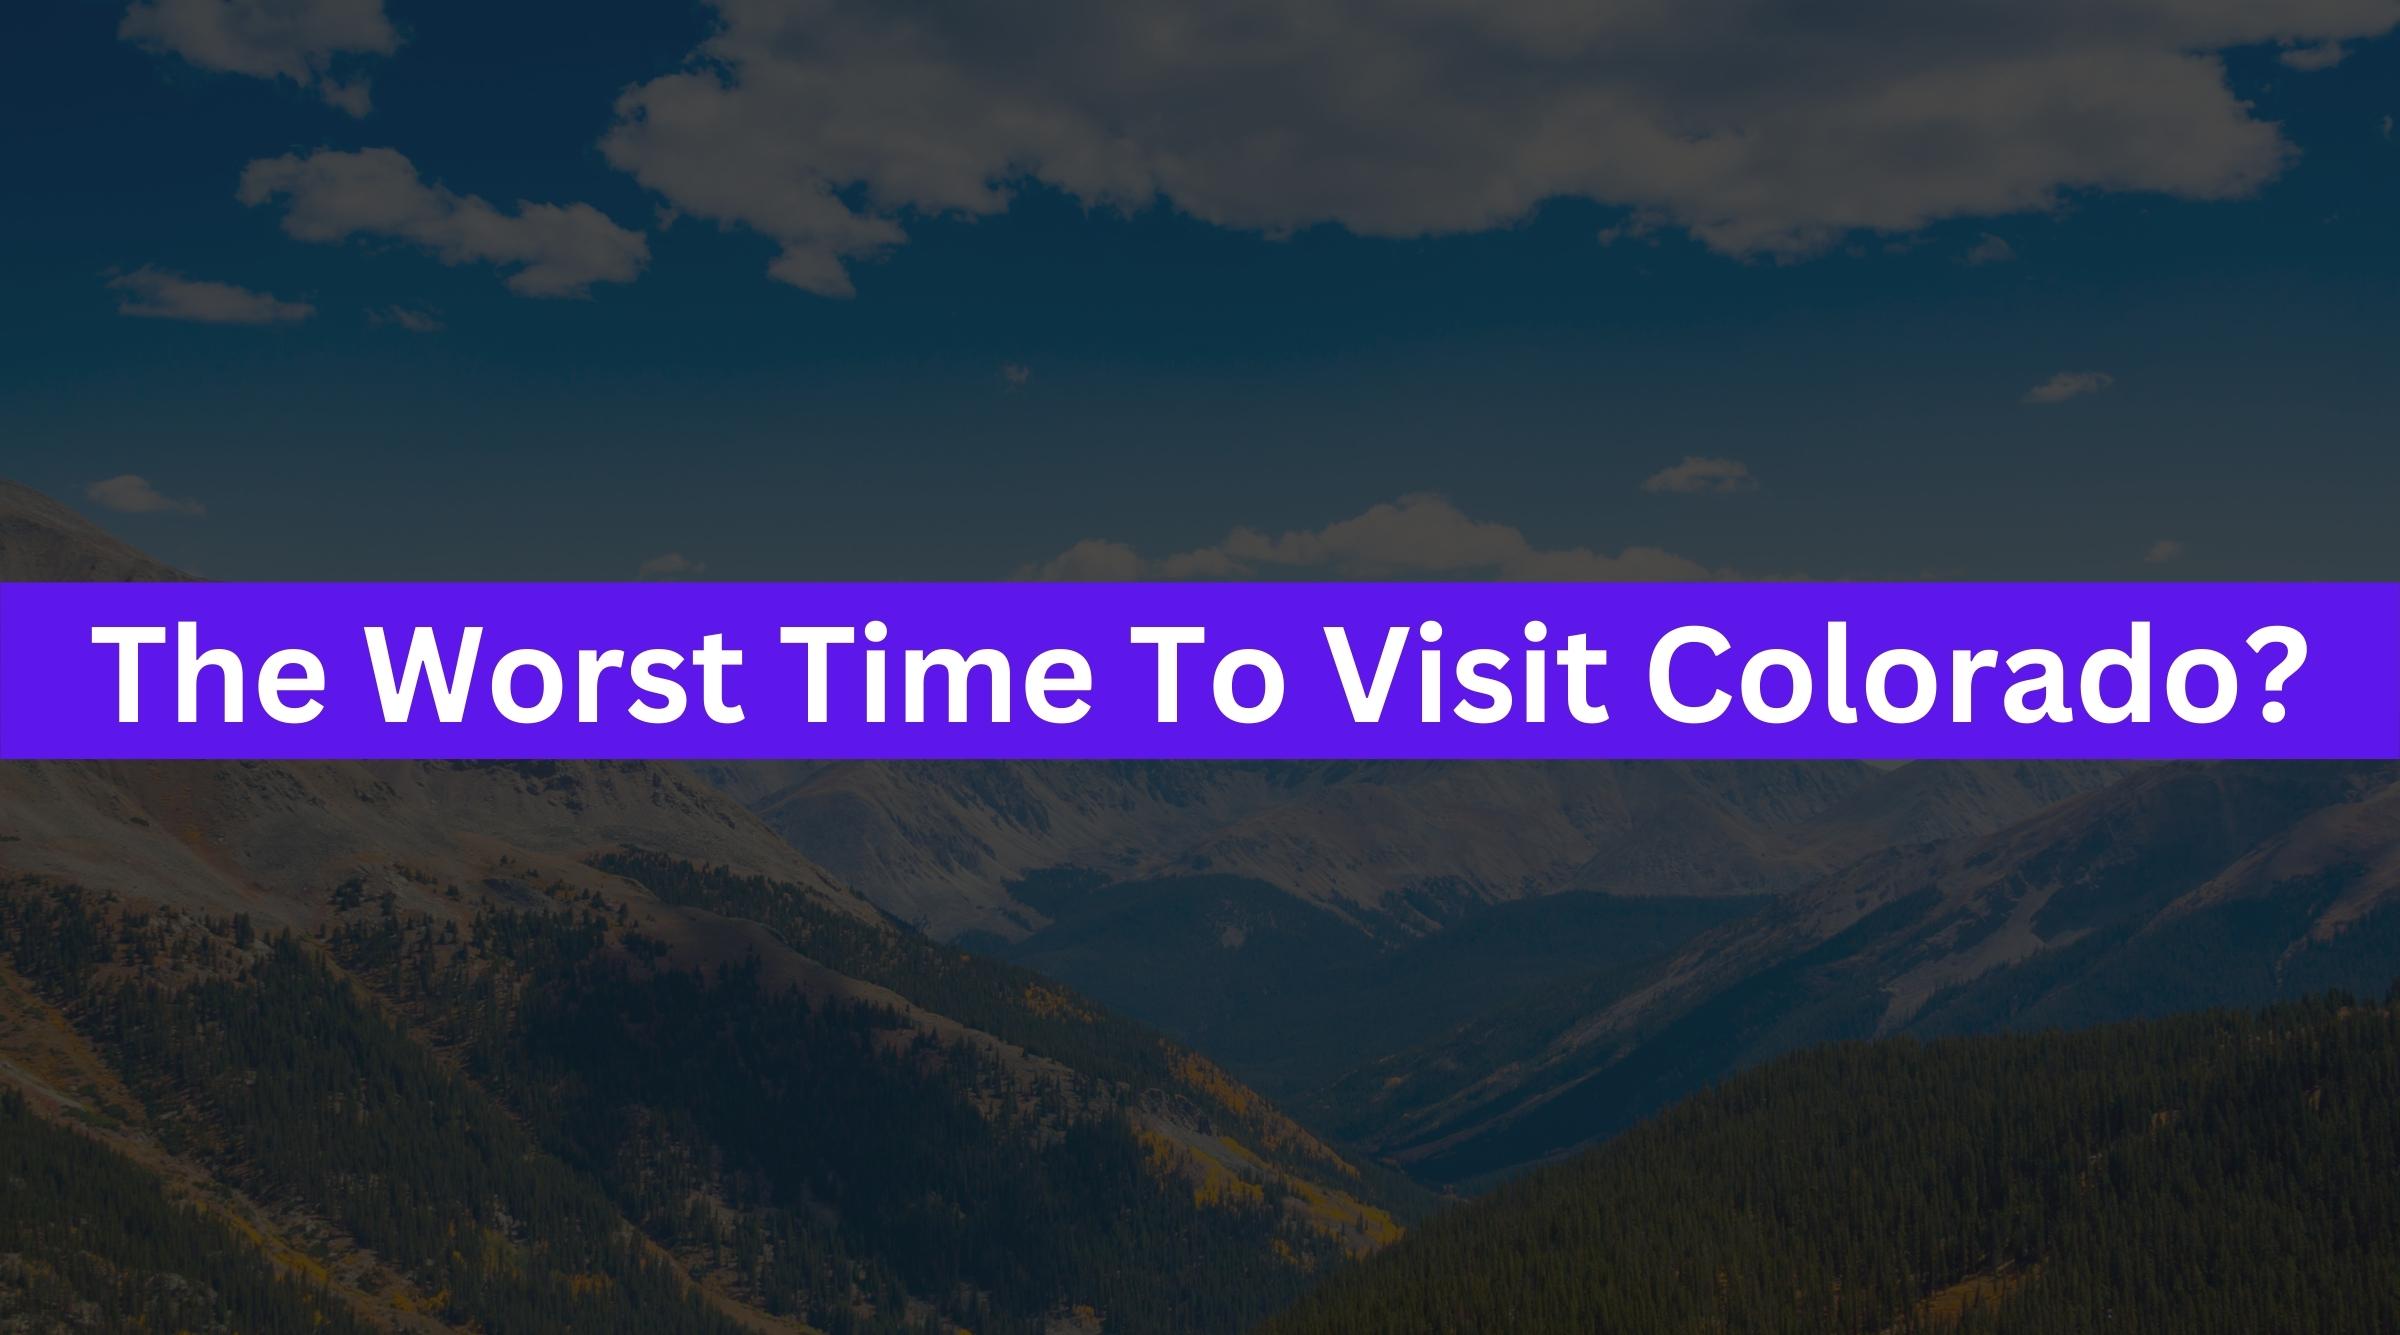 What’s The Worst Time To Visit Colorado